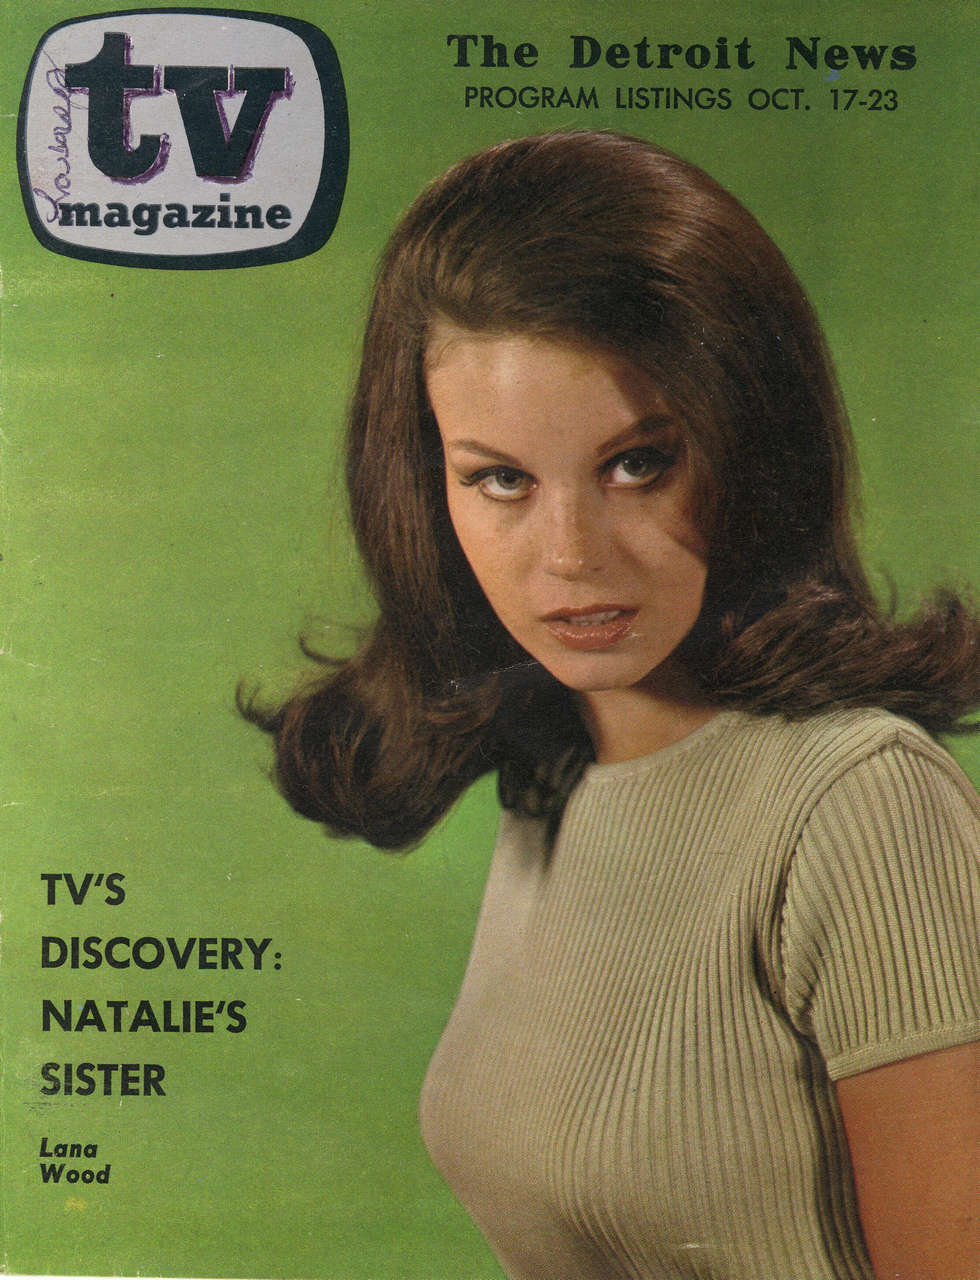 Lana Wood On The Cover Of The Detroit News Tv Guide Scanned In From The Actual Cover NSF